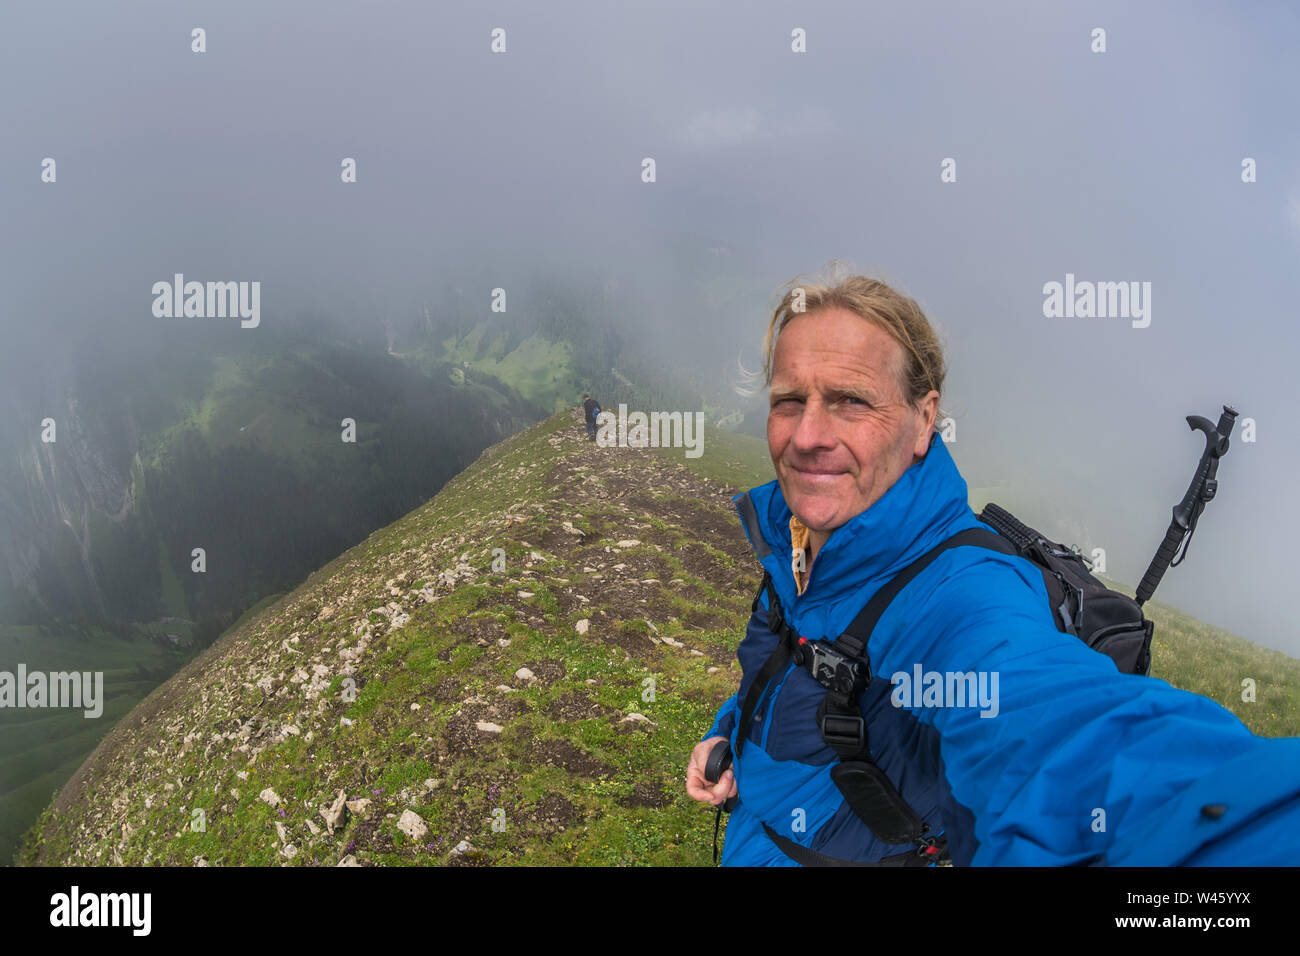 selfie on a mountain crest with fog Stock Photo